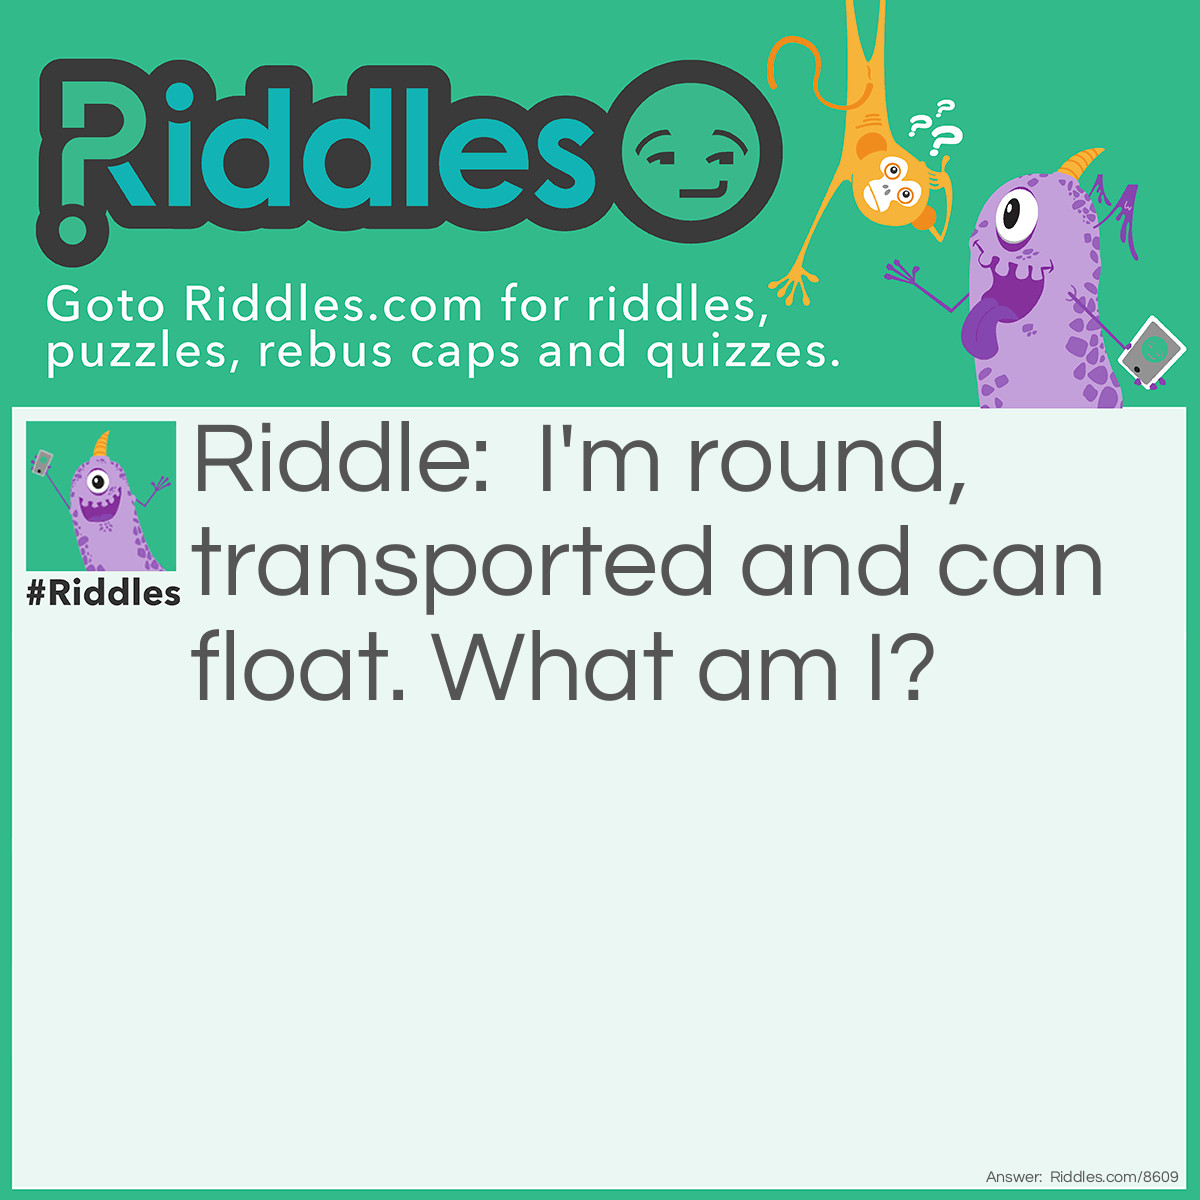 Riddle: I'm round, transported and can float. What am I? Answer: idk...Pls help